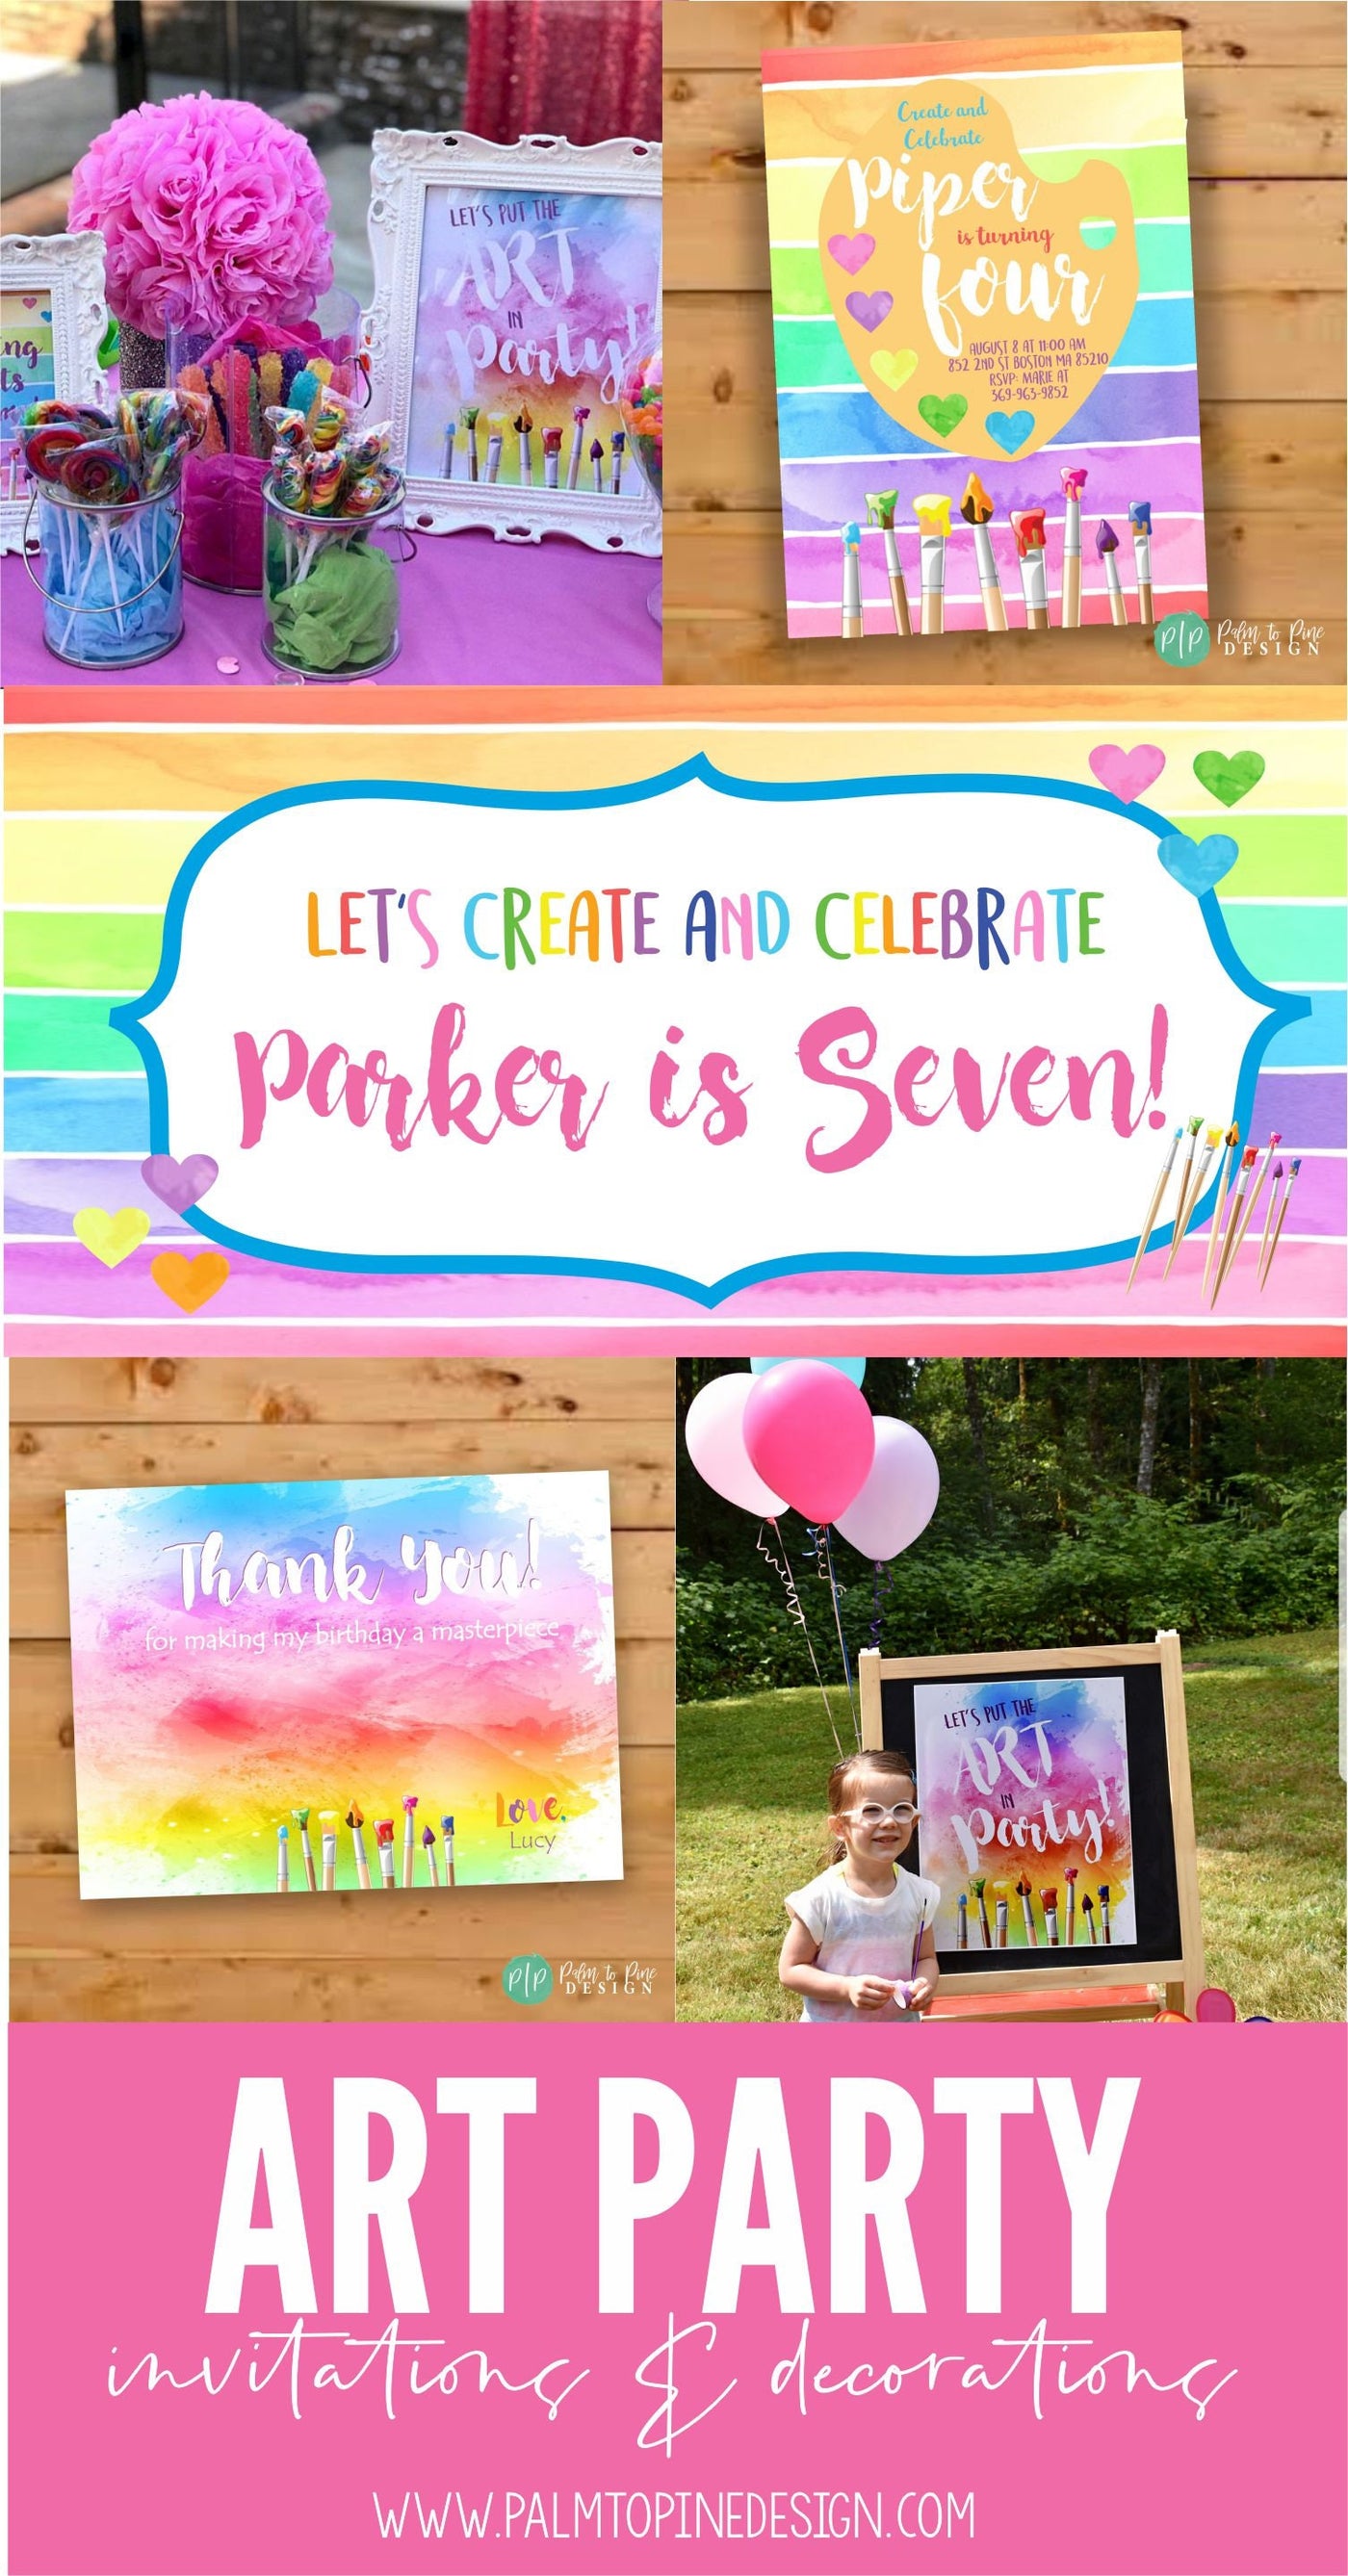 Art Party Banner Painting Party Decorations, Art Party Decor